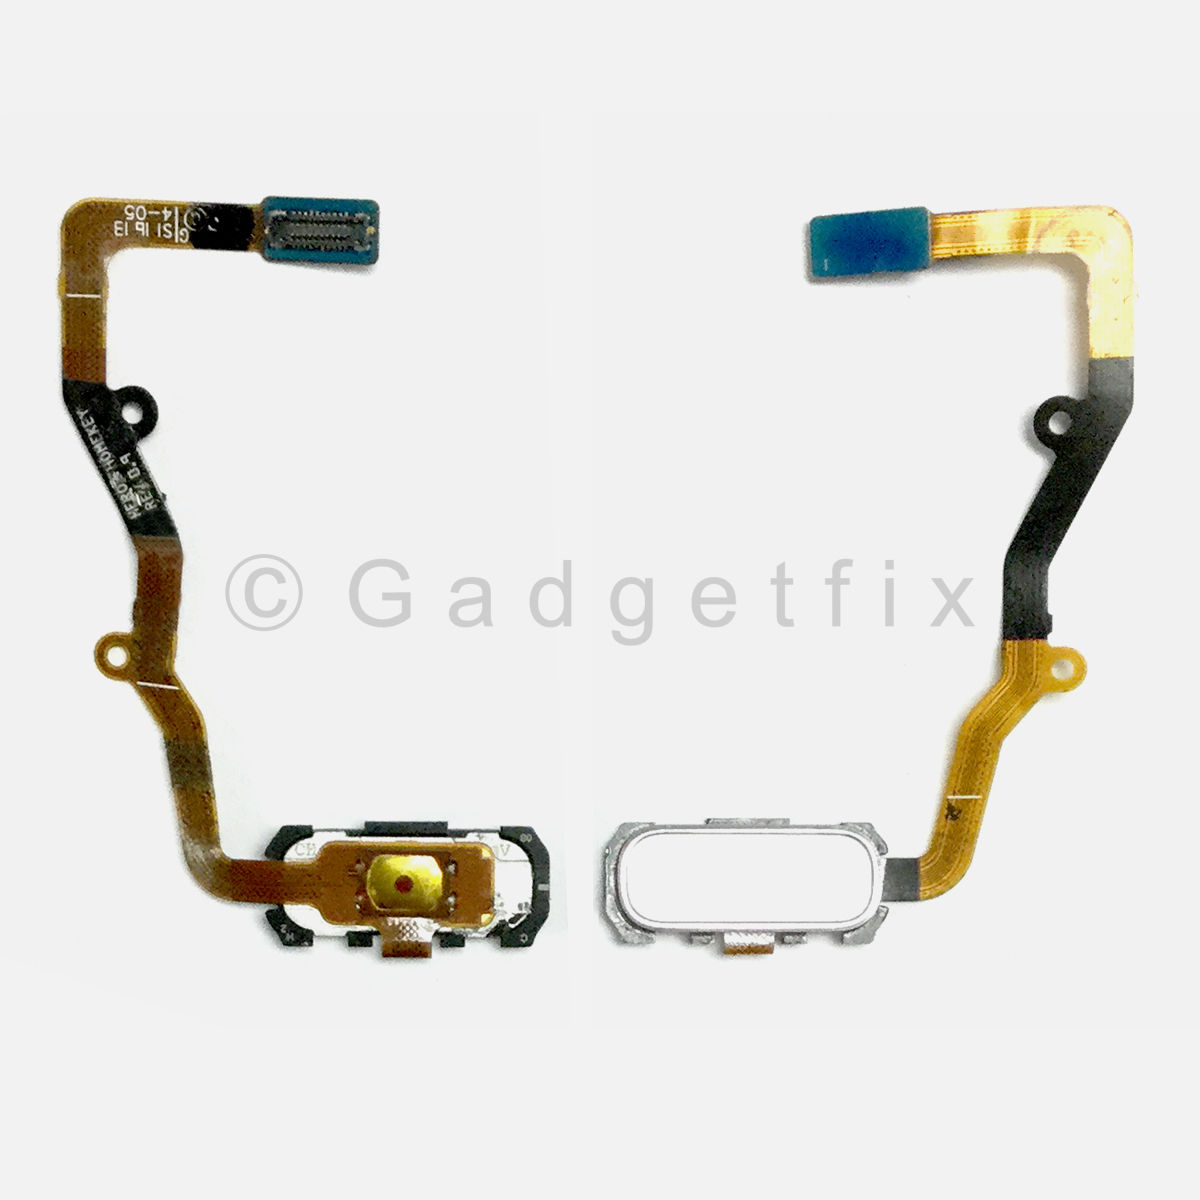 Silver Home Button Flex Cable Replacement Parts For Samsung Galaxy S7 Edge G935